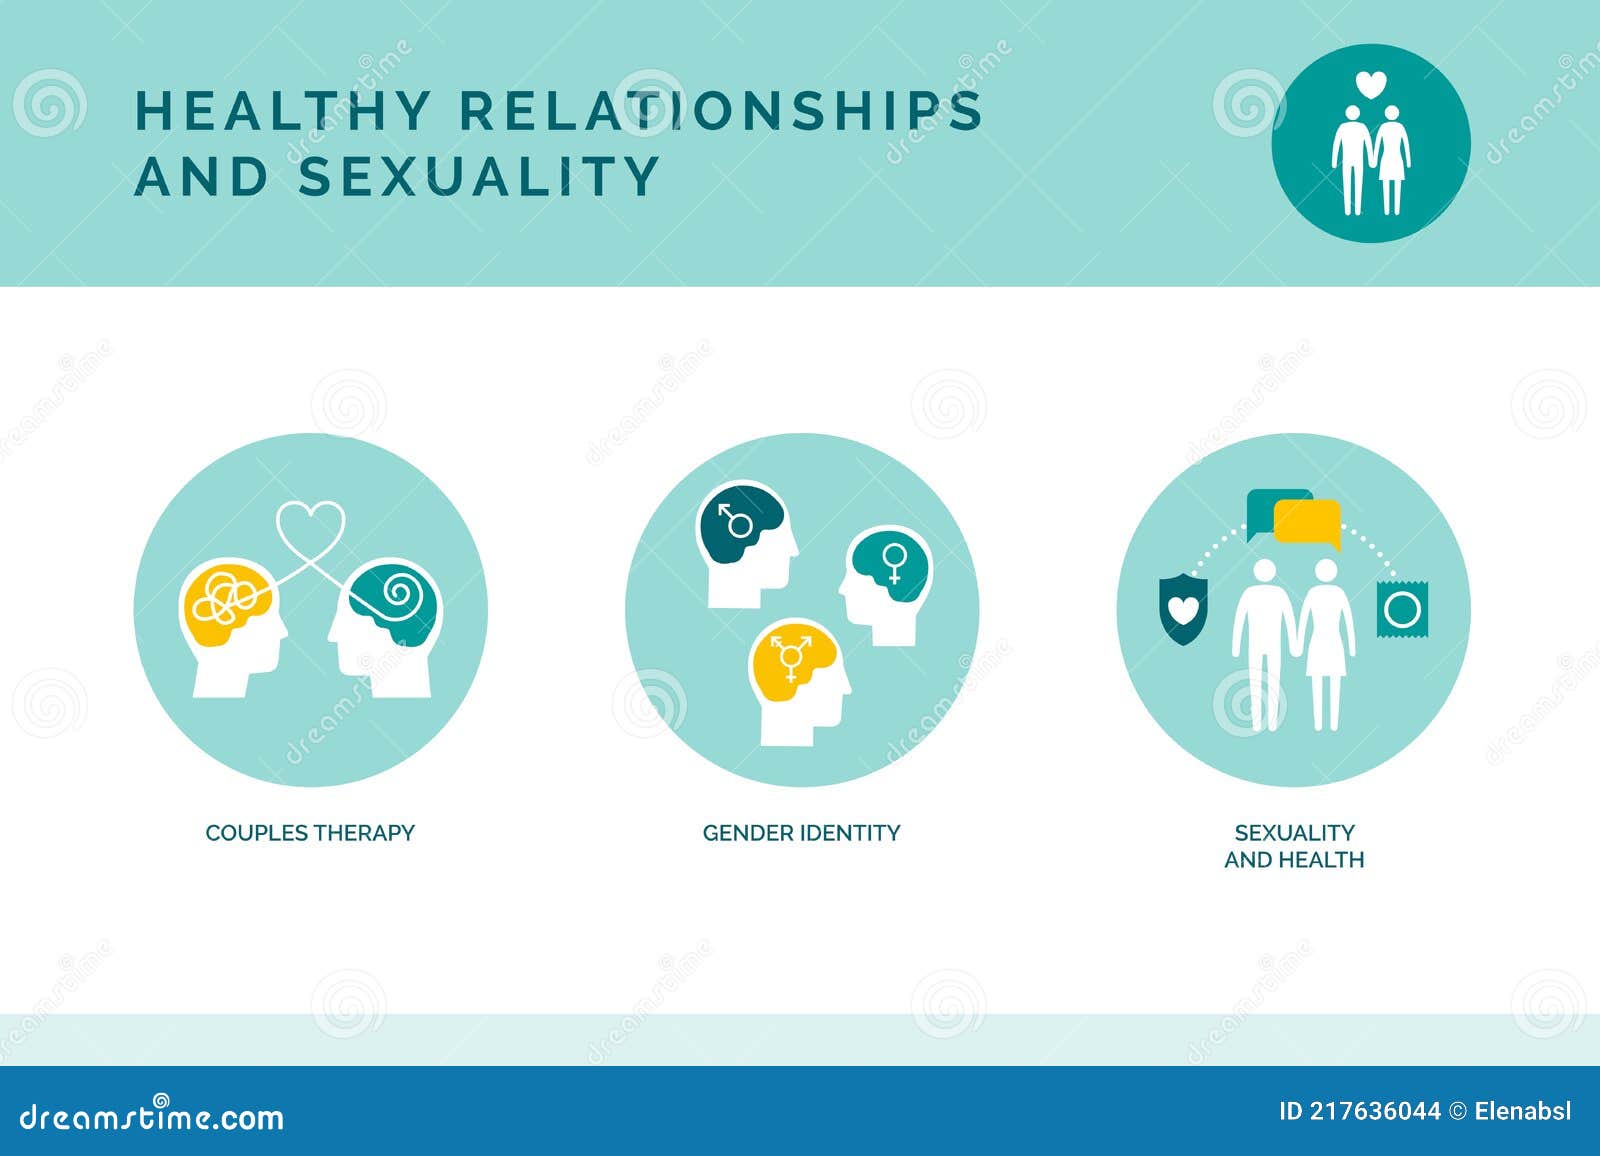 healthy relationships and sexuality